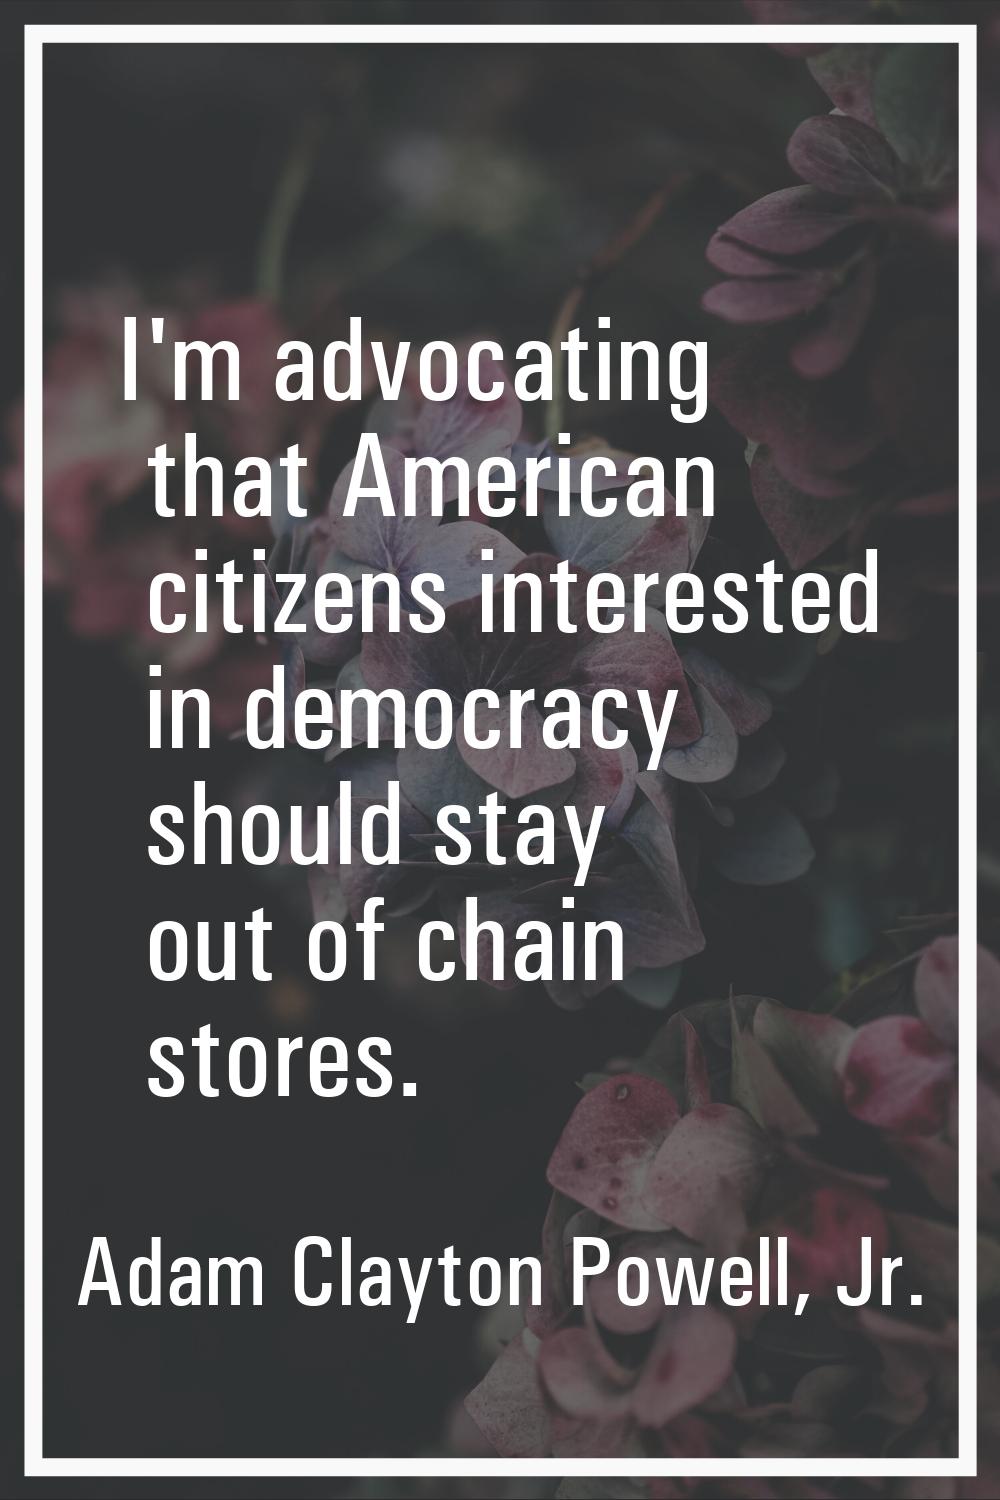 I'm advocating that American citizens interested in democracy should stay out of chain stores.